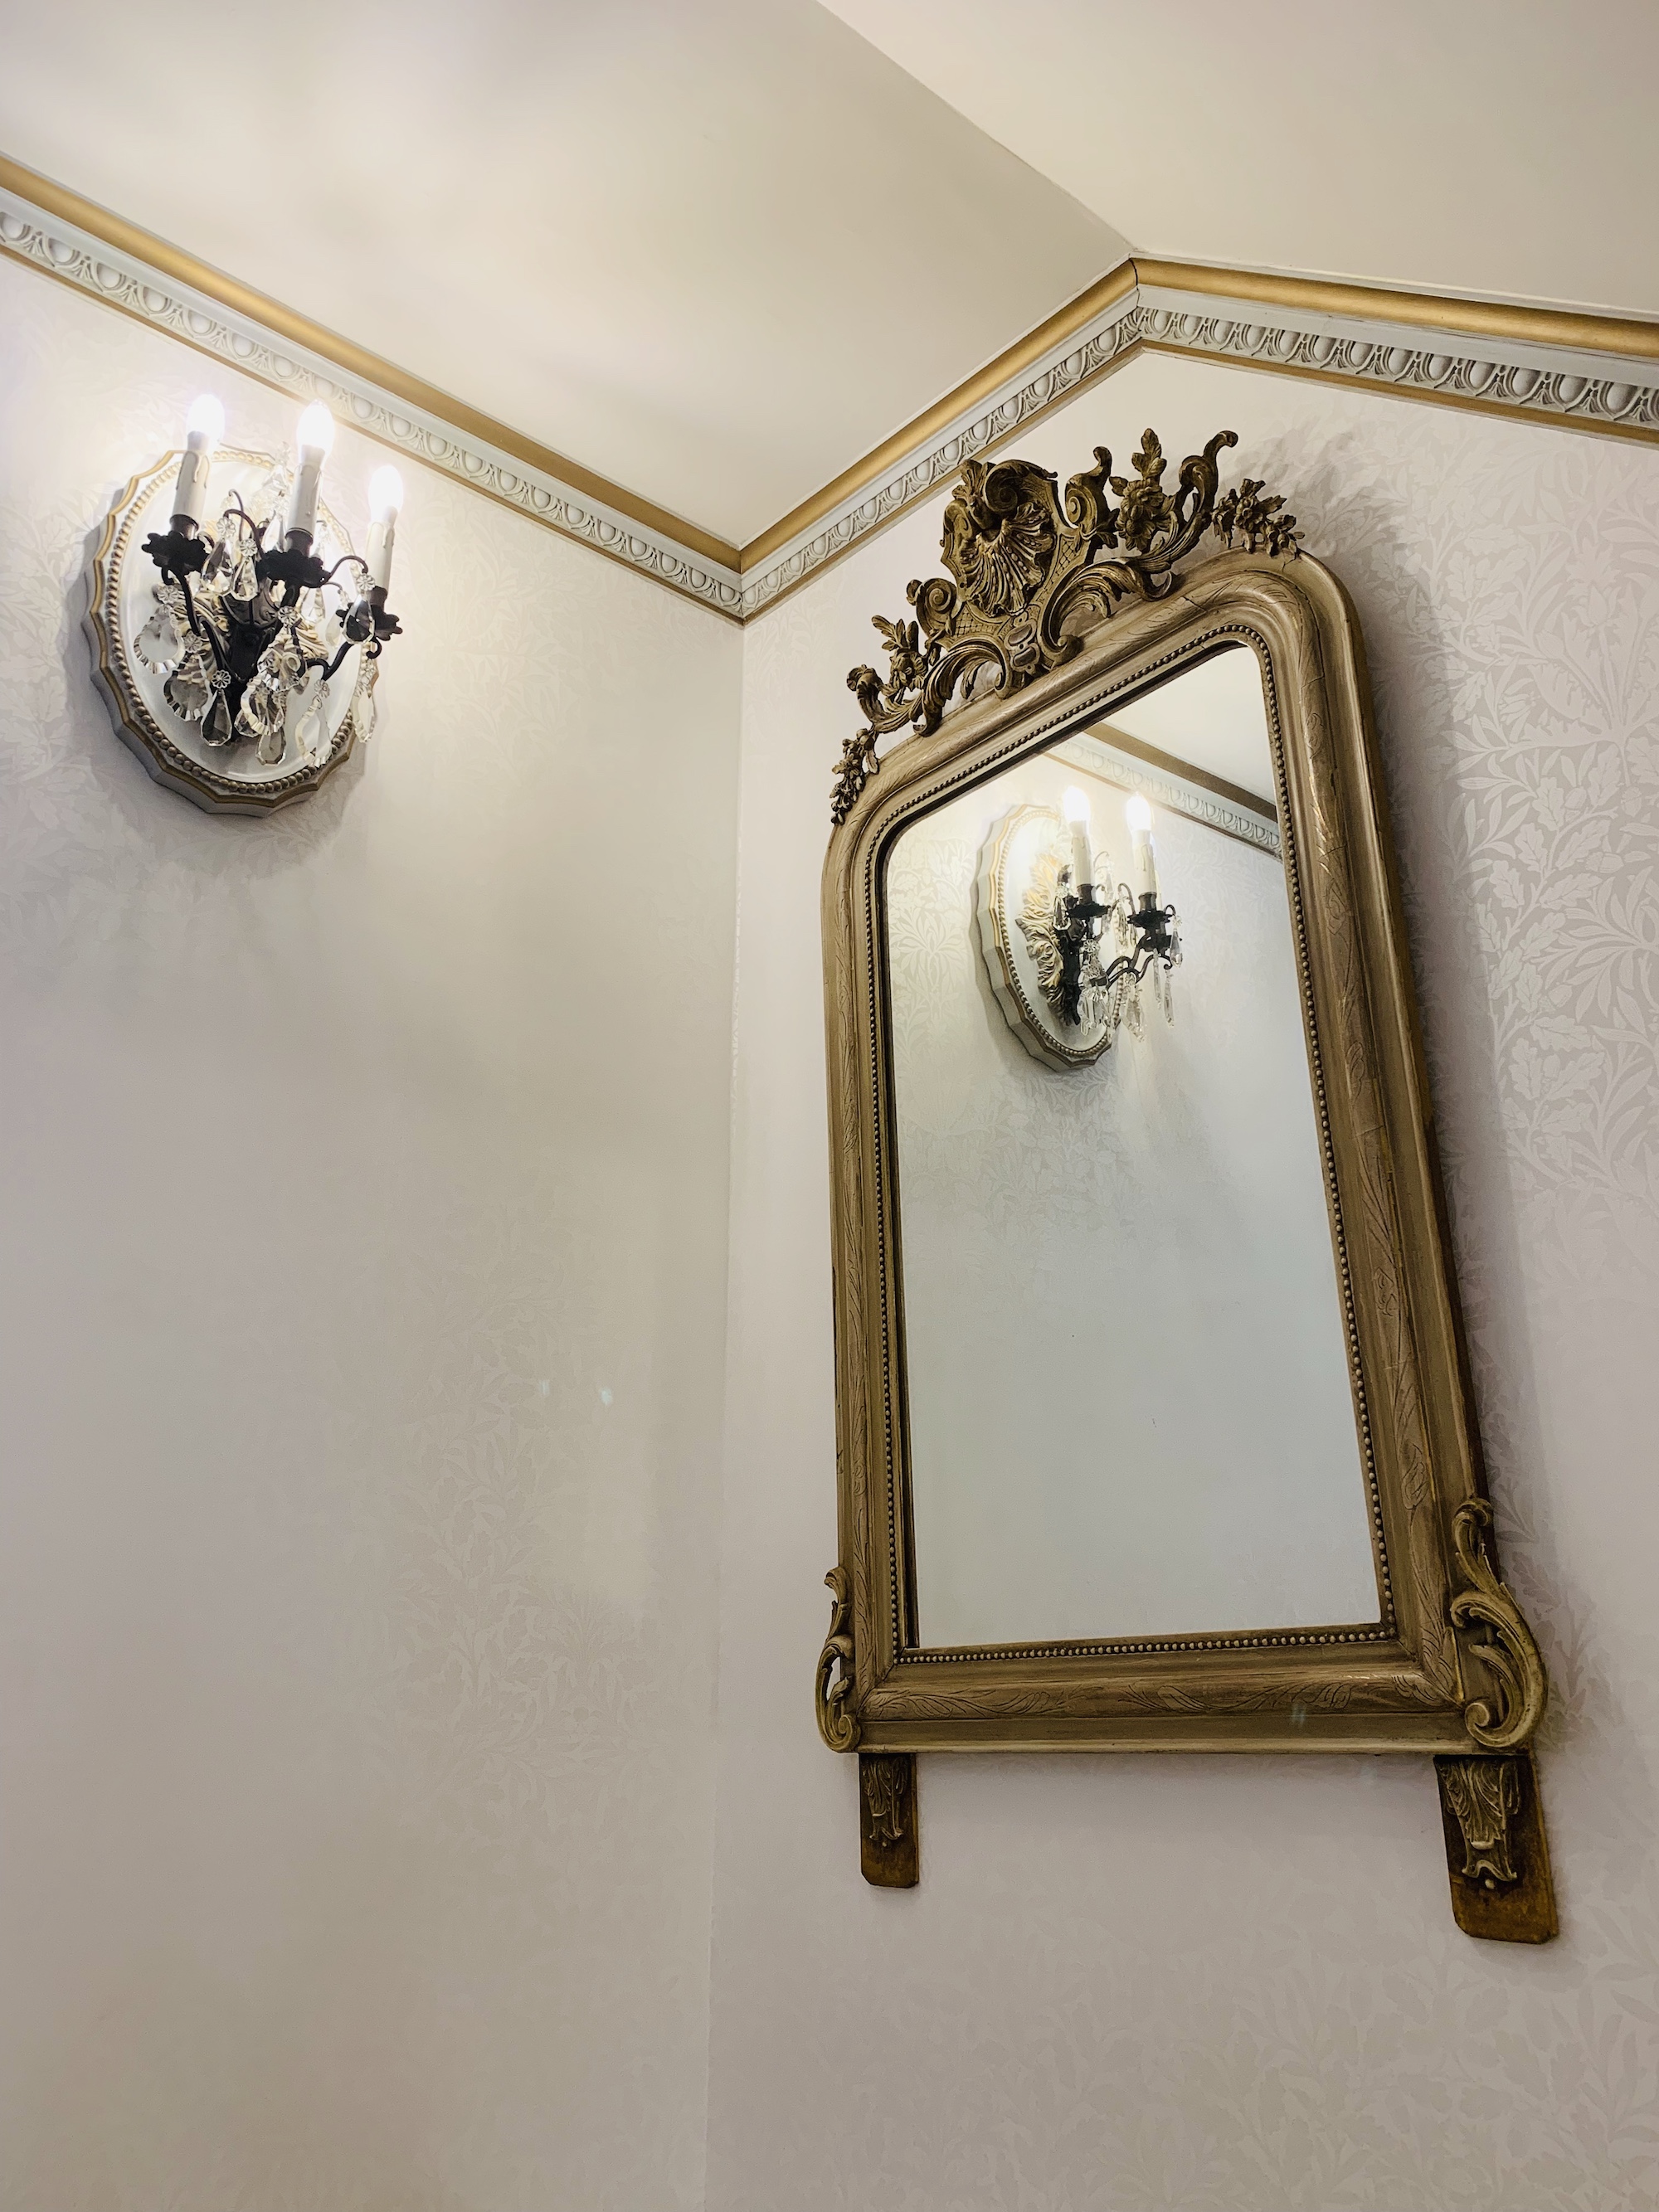 French mirror and wall lights in the stairwell